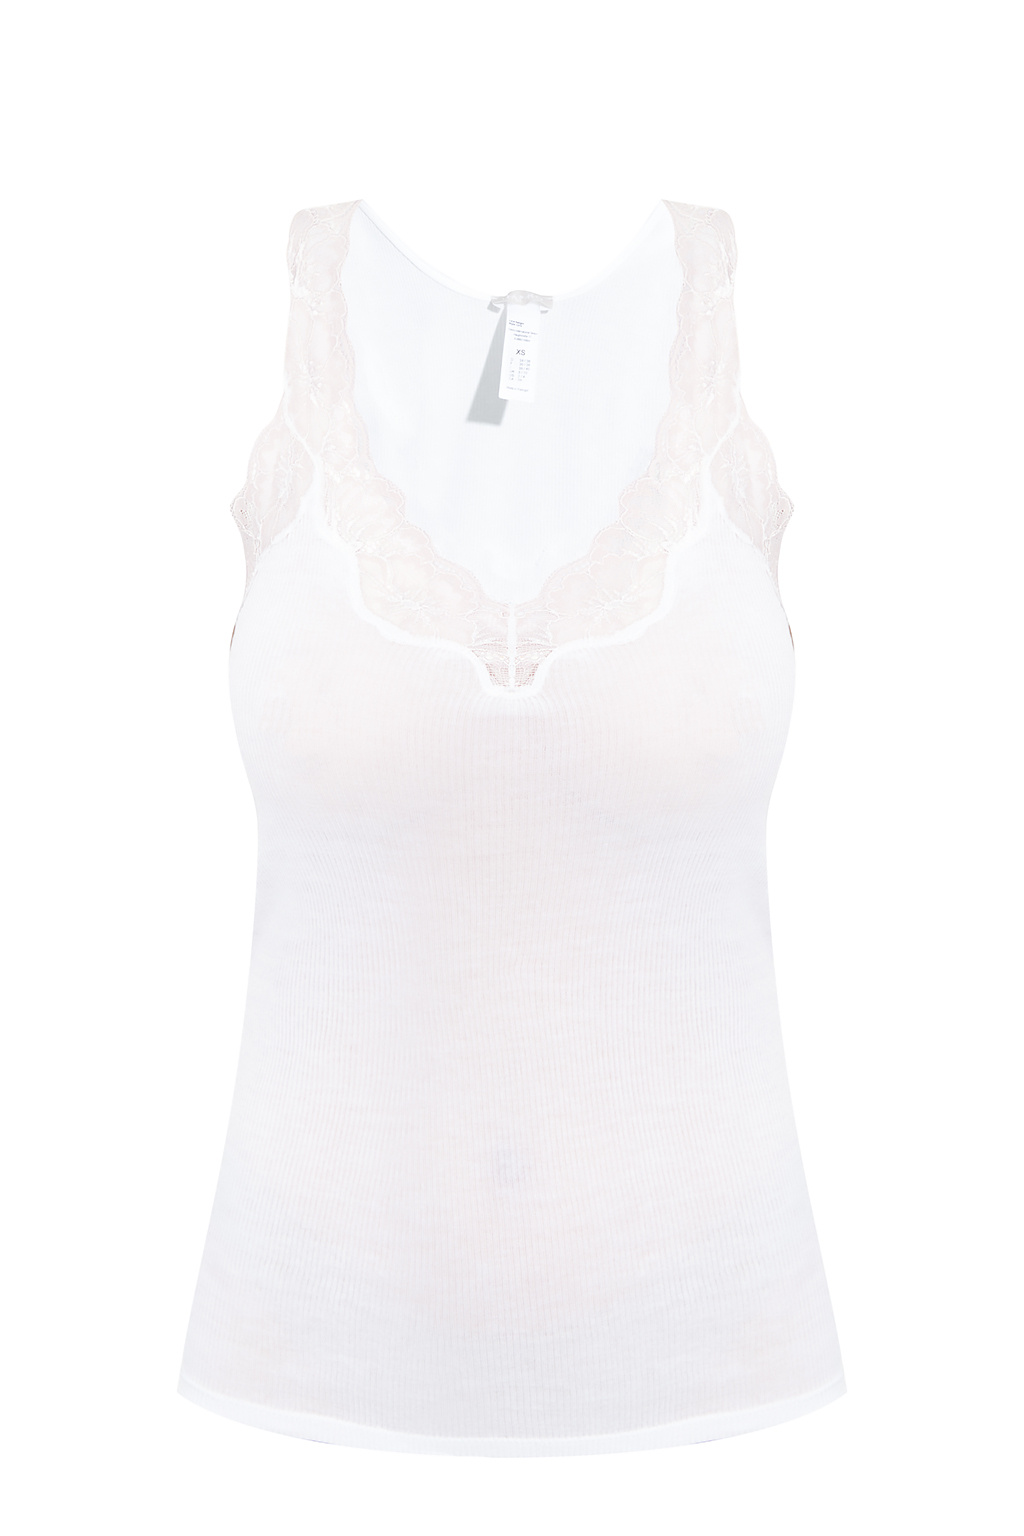 Hanro Top with lace trims